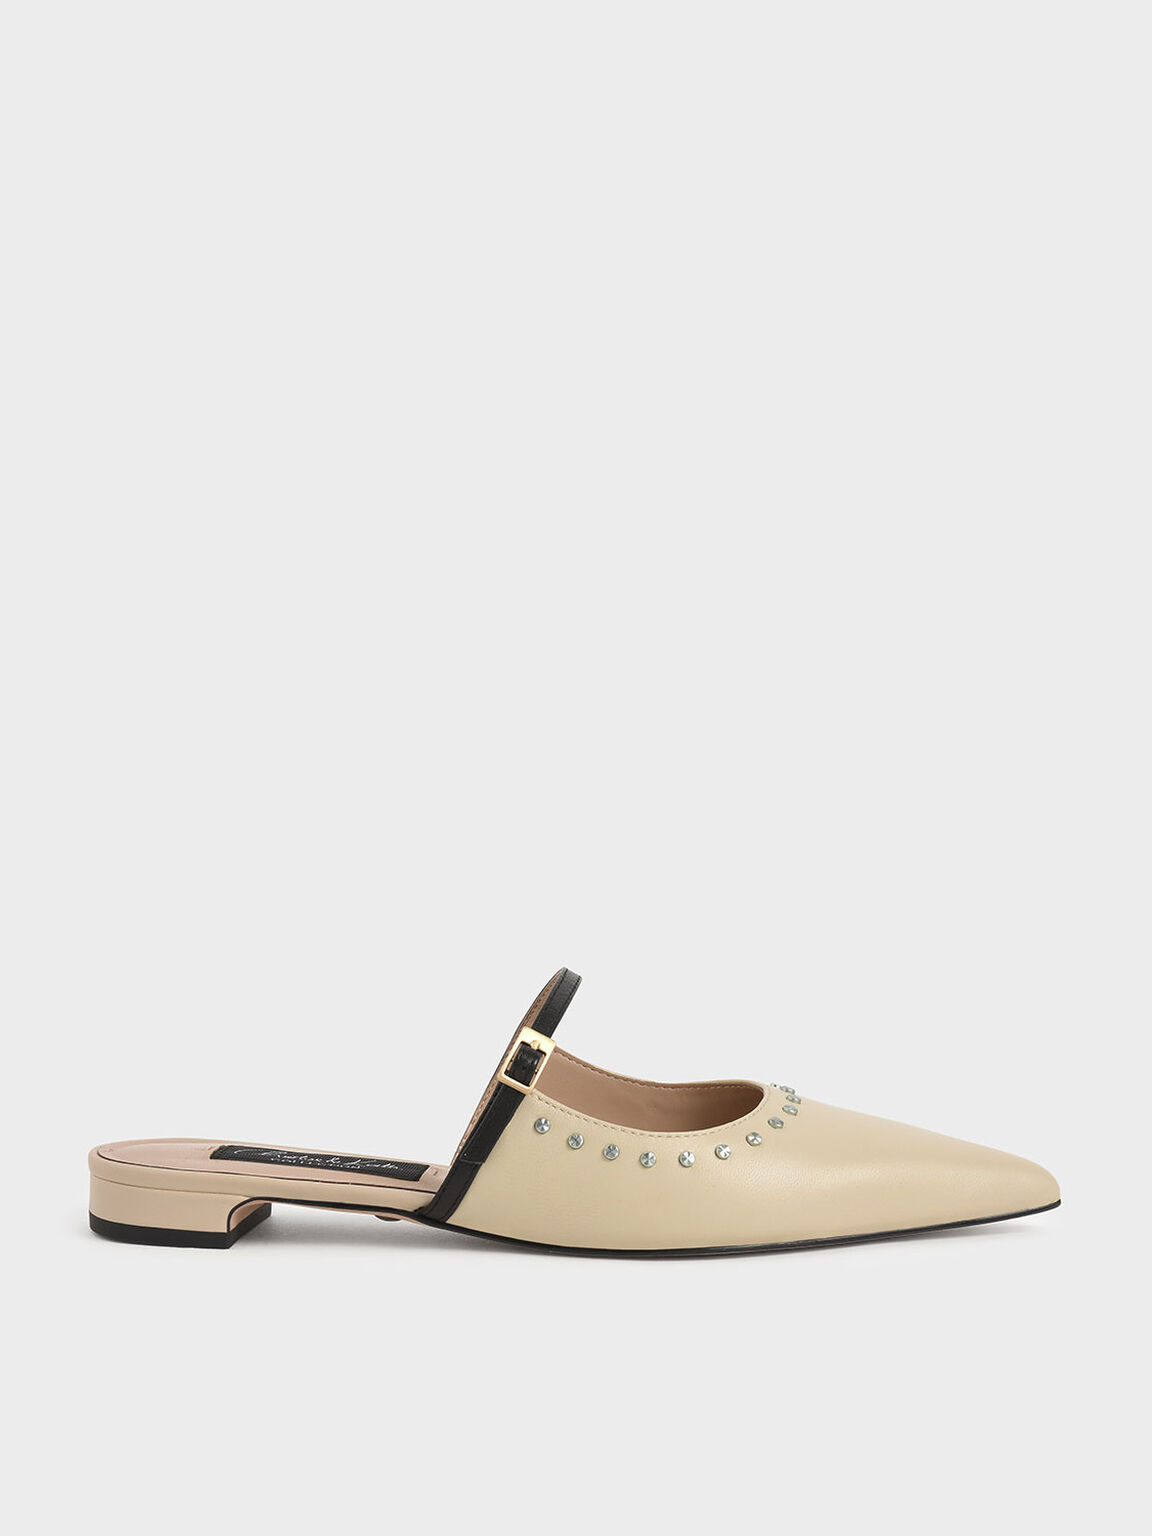 Studded Leather Mules, Beige, hi-res